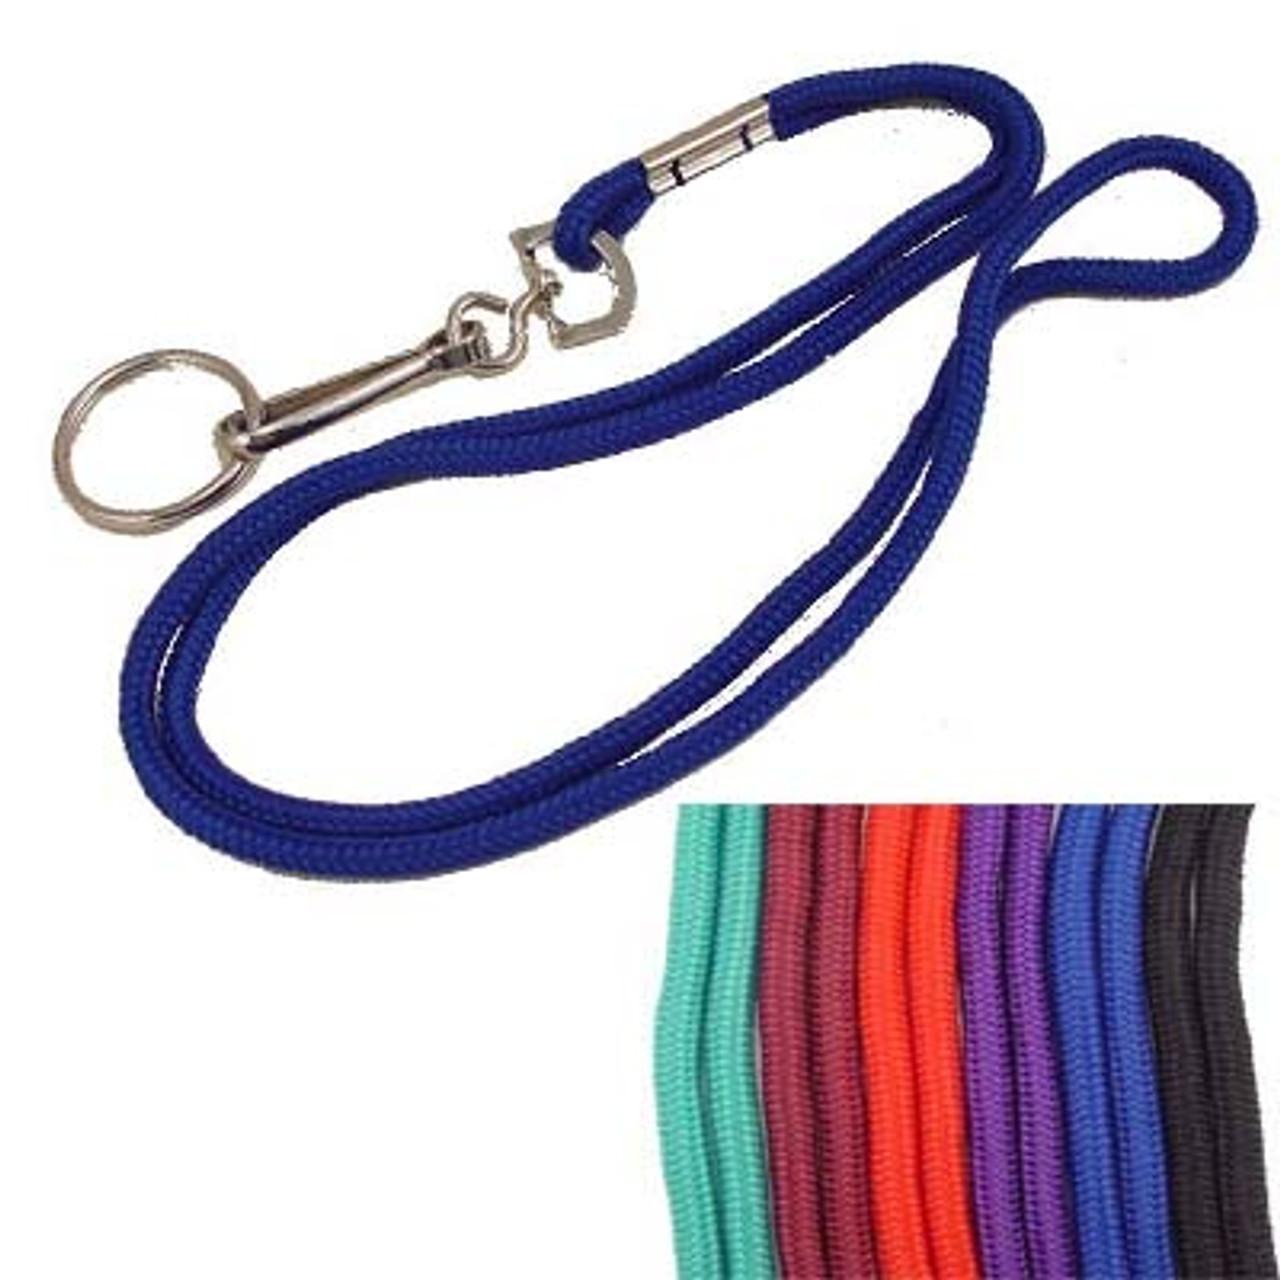 Shop for and Buy Neck String Key Holder with Split Key Ring at